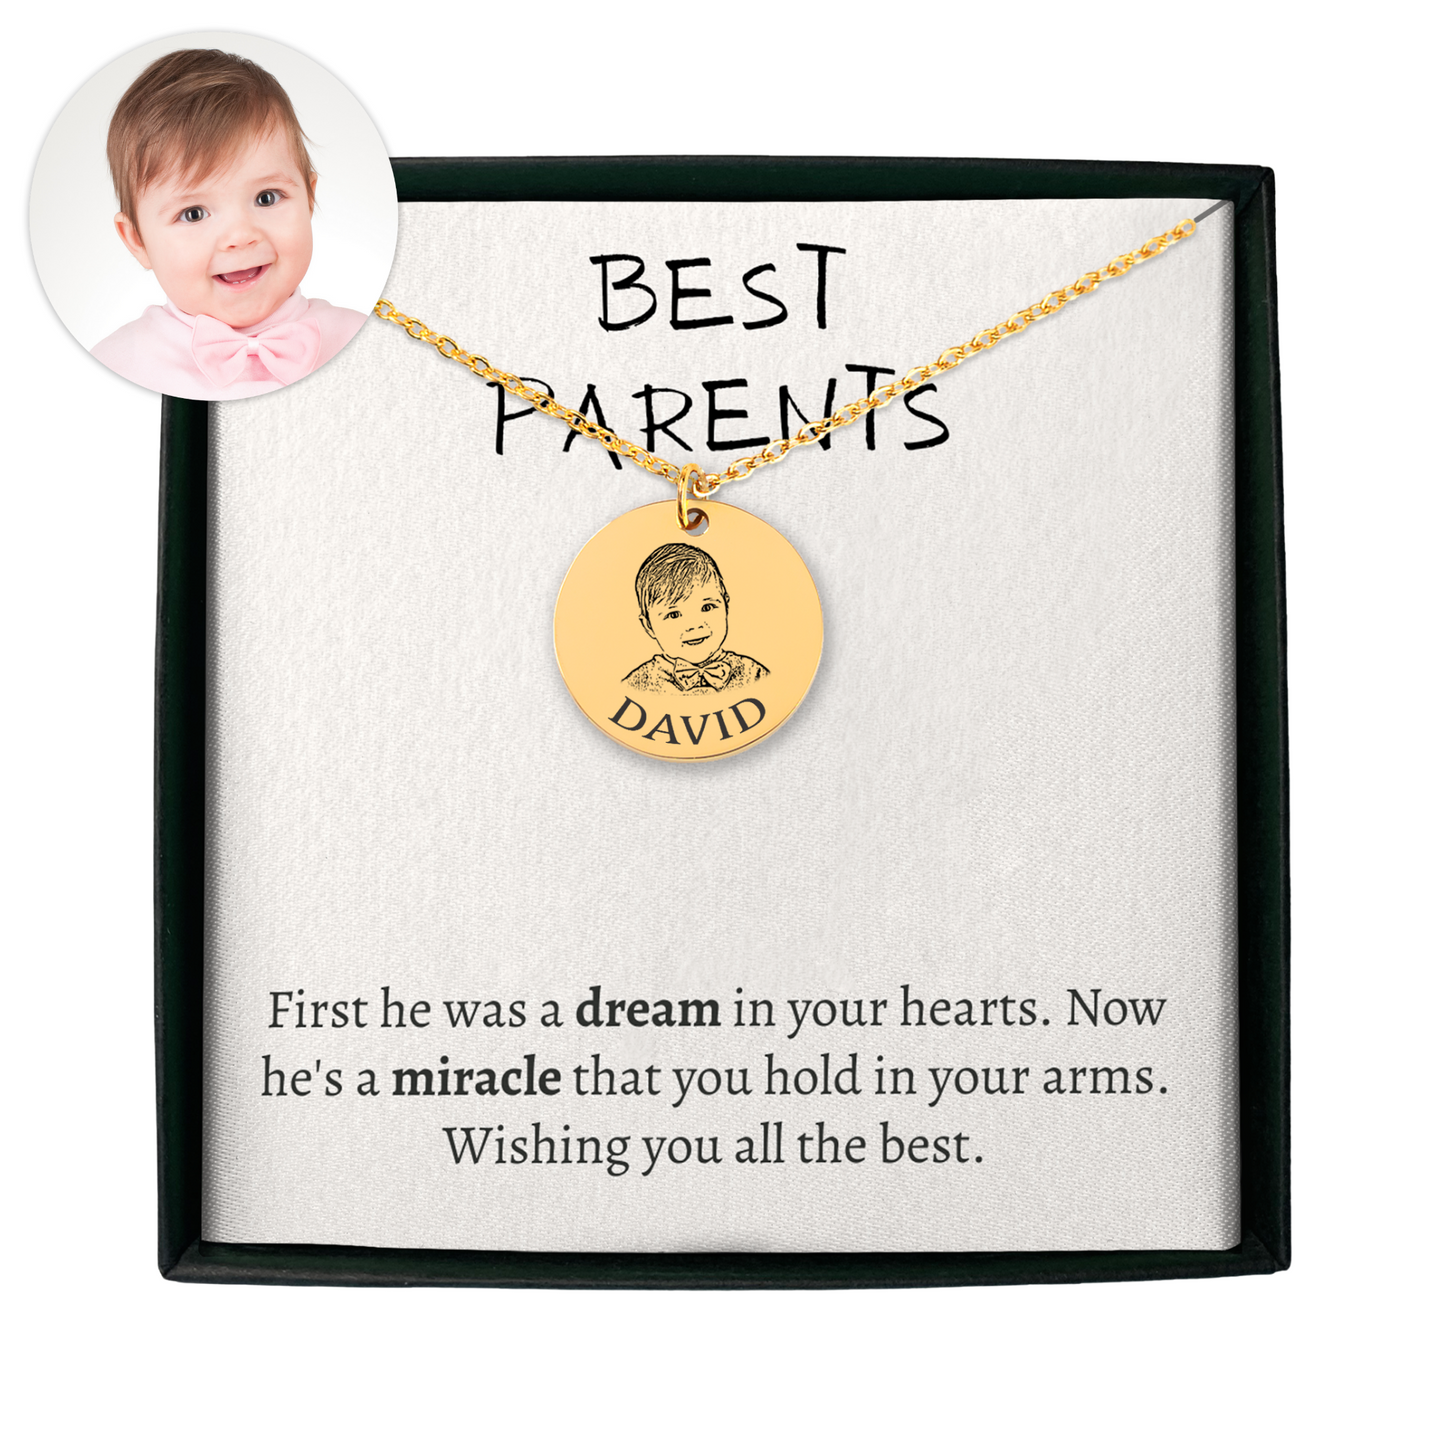 Personalized Necklace, Gifts for Mom, Dad, Grandpa, Grandma, Grandfather, Grandmother, Baby Portrait Necklace